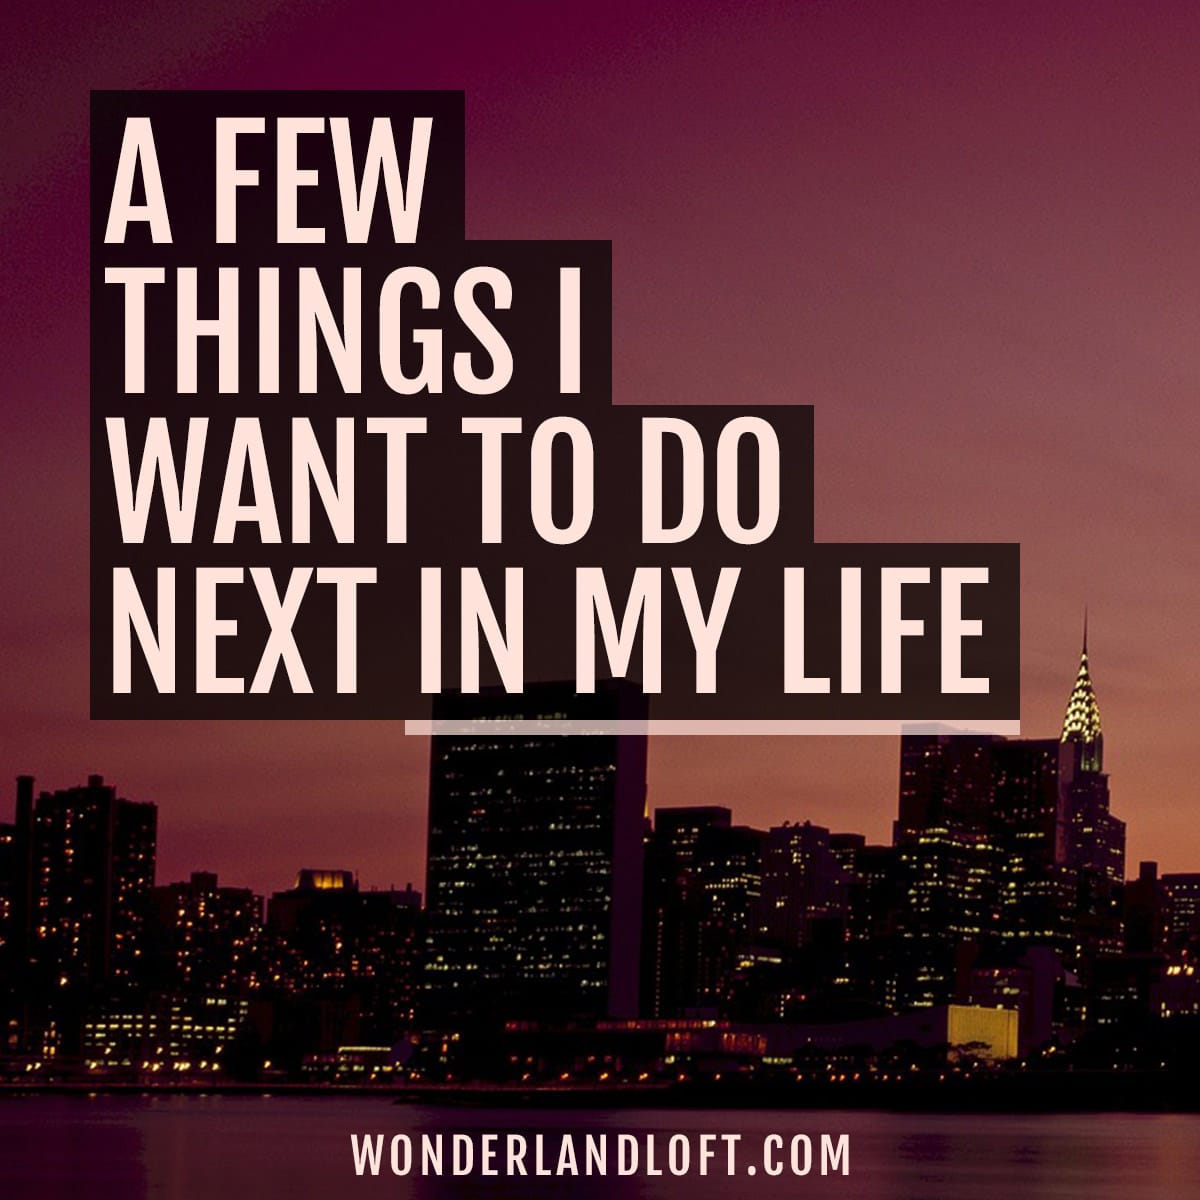 Things I want to do next in my life